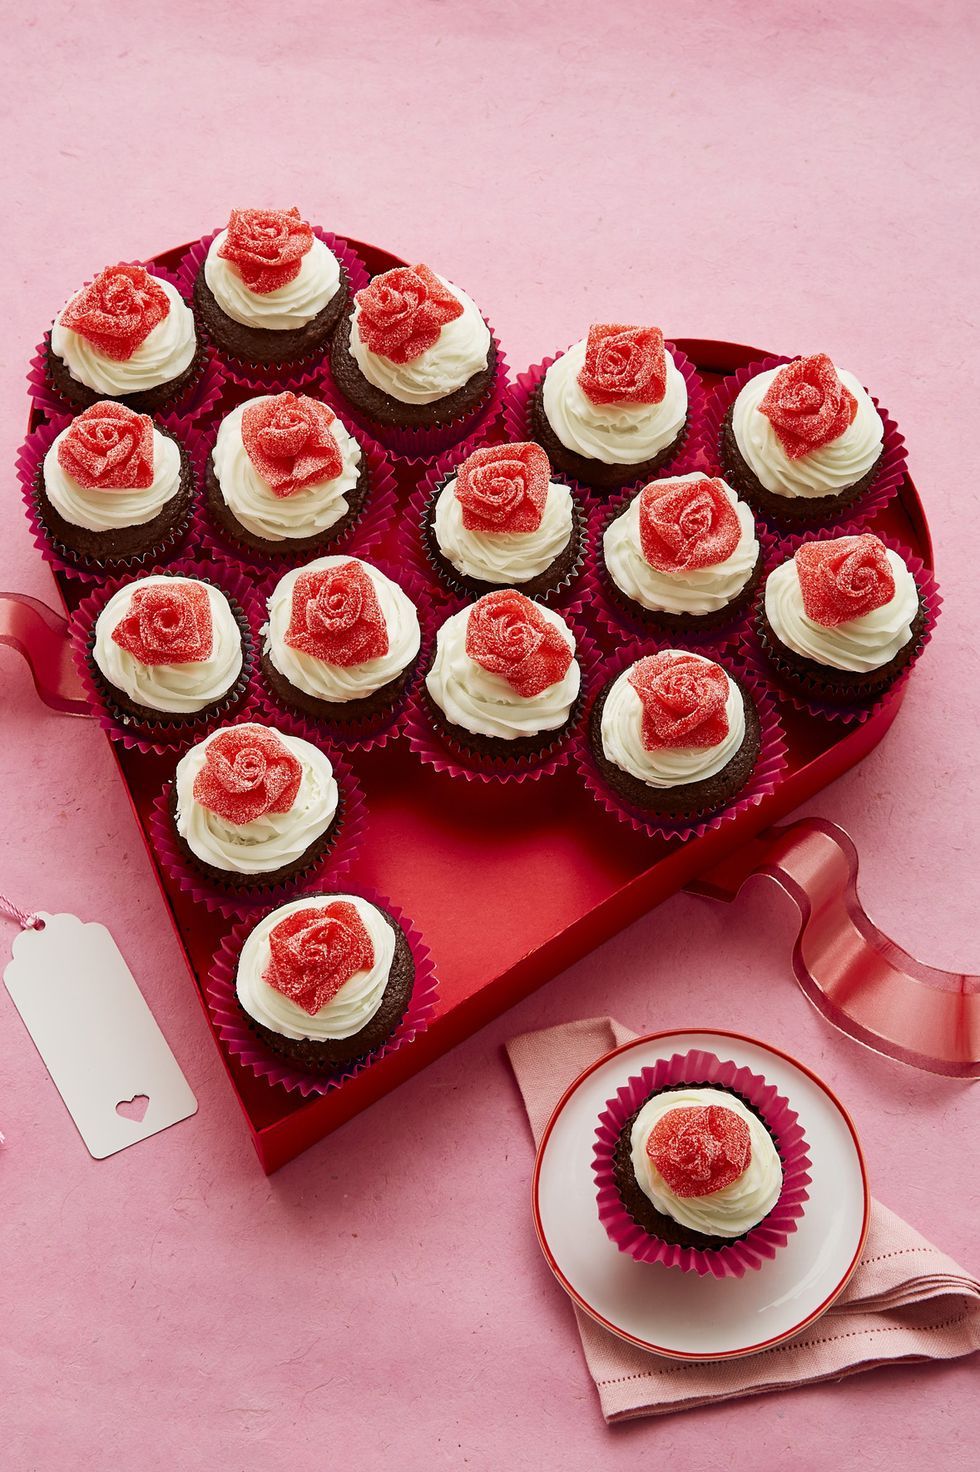 7 Cute and Easy Valentine's Cake Ideas - Cake by Courtney